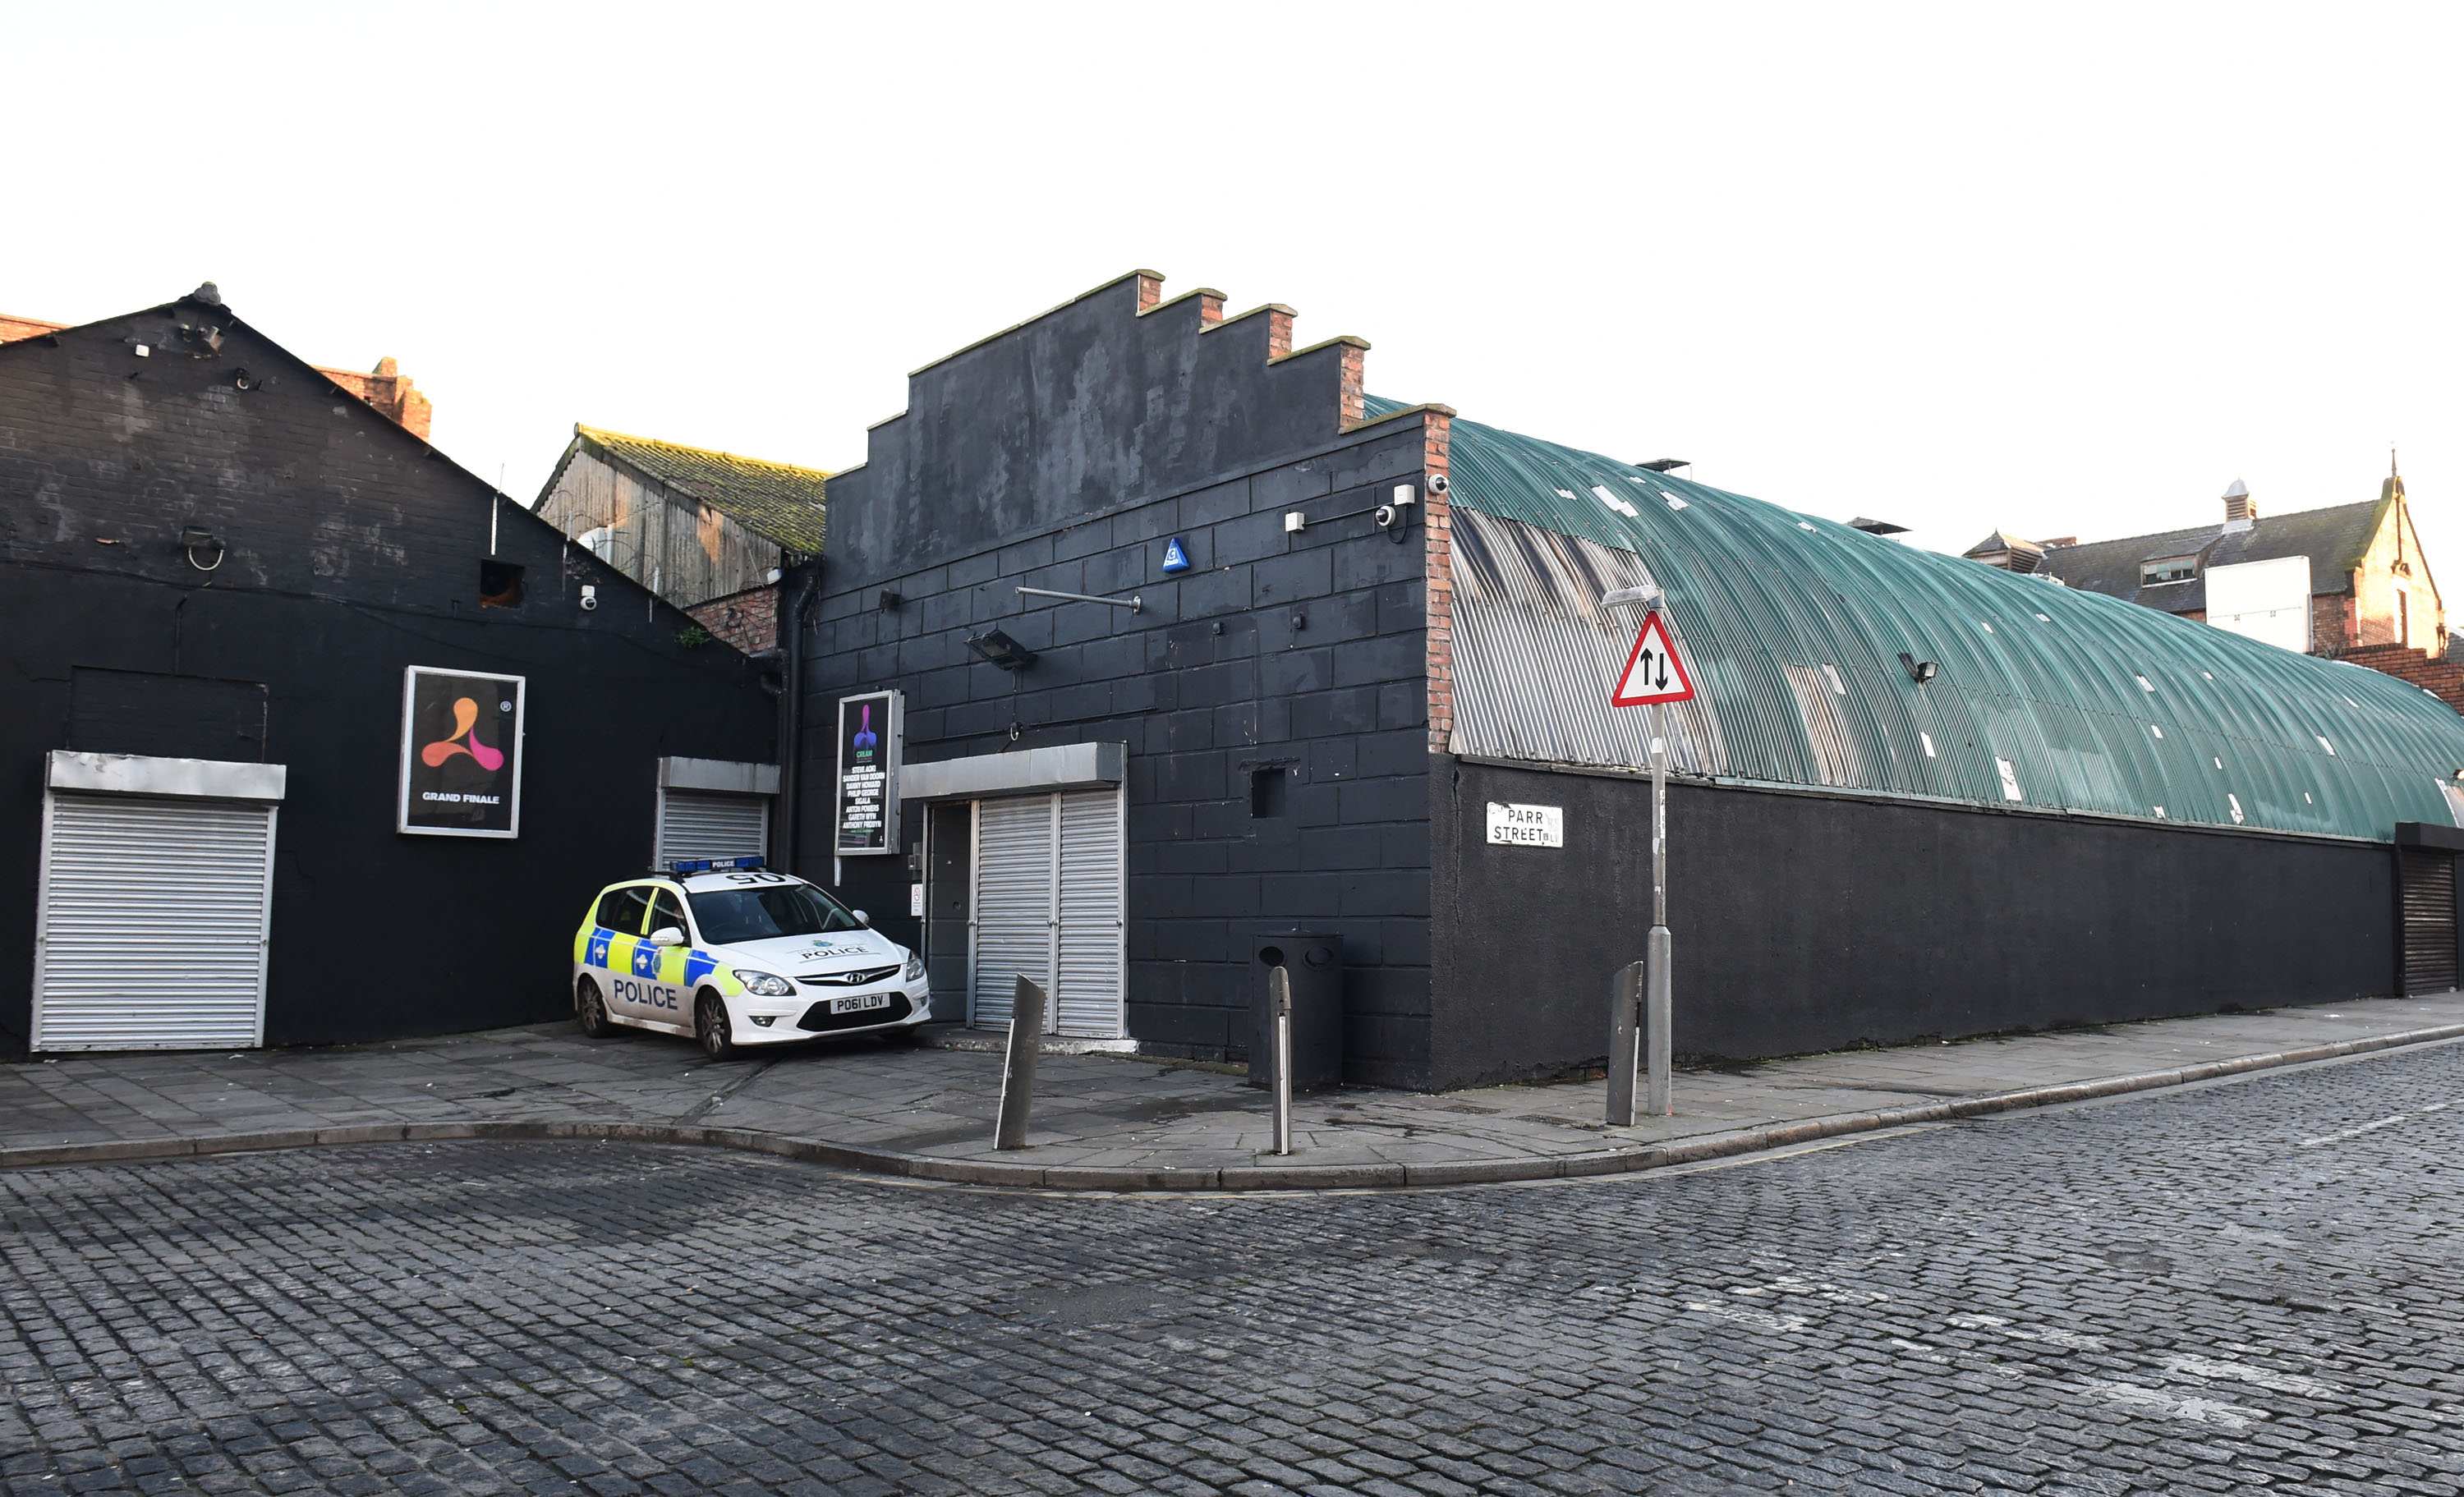 Toxicology reports to be carried out following clubber's death - 3FM ...